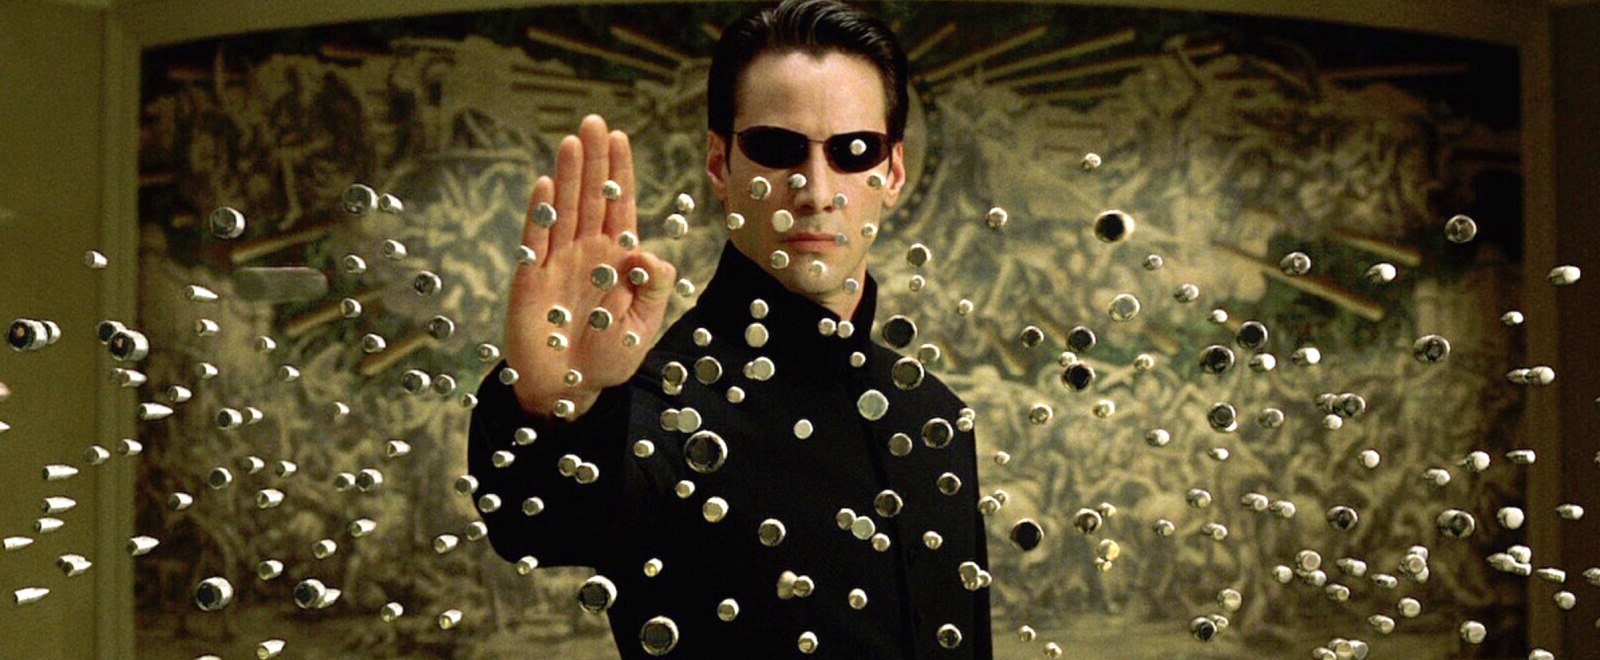 A ‘Matrix’ Sequels Actress Is Confused About Why Her Character Isn’t In ‘The Matrix 4’ But Dead Characters Are Coming Back